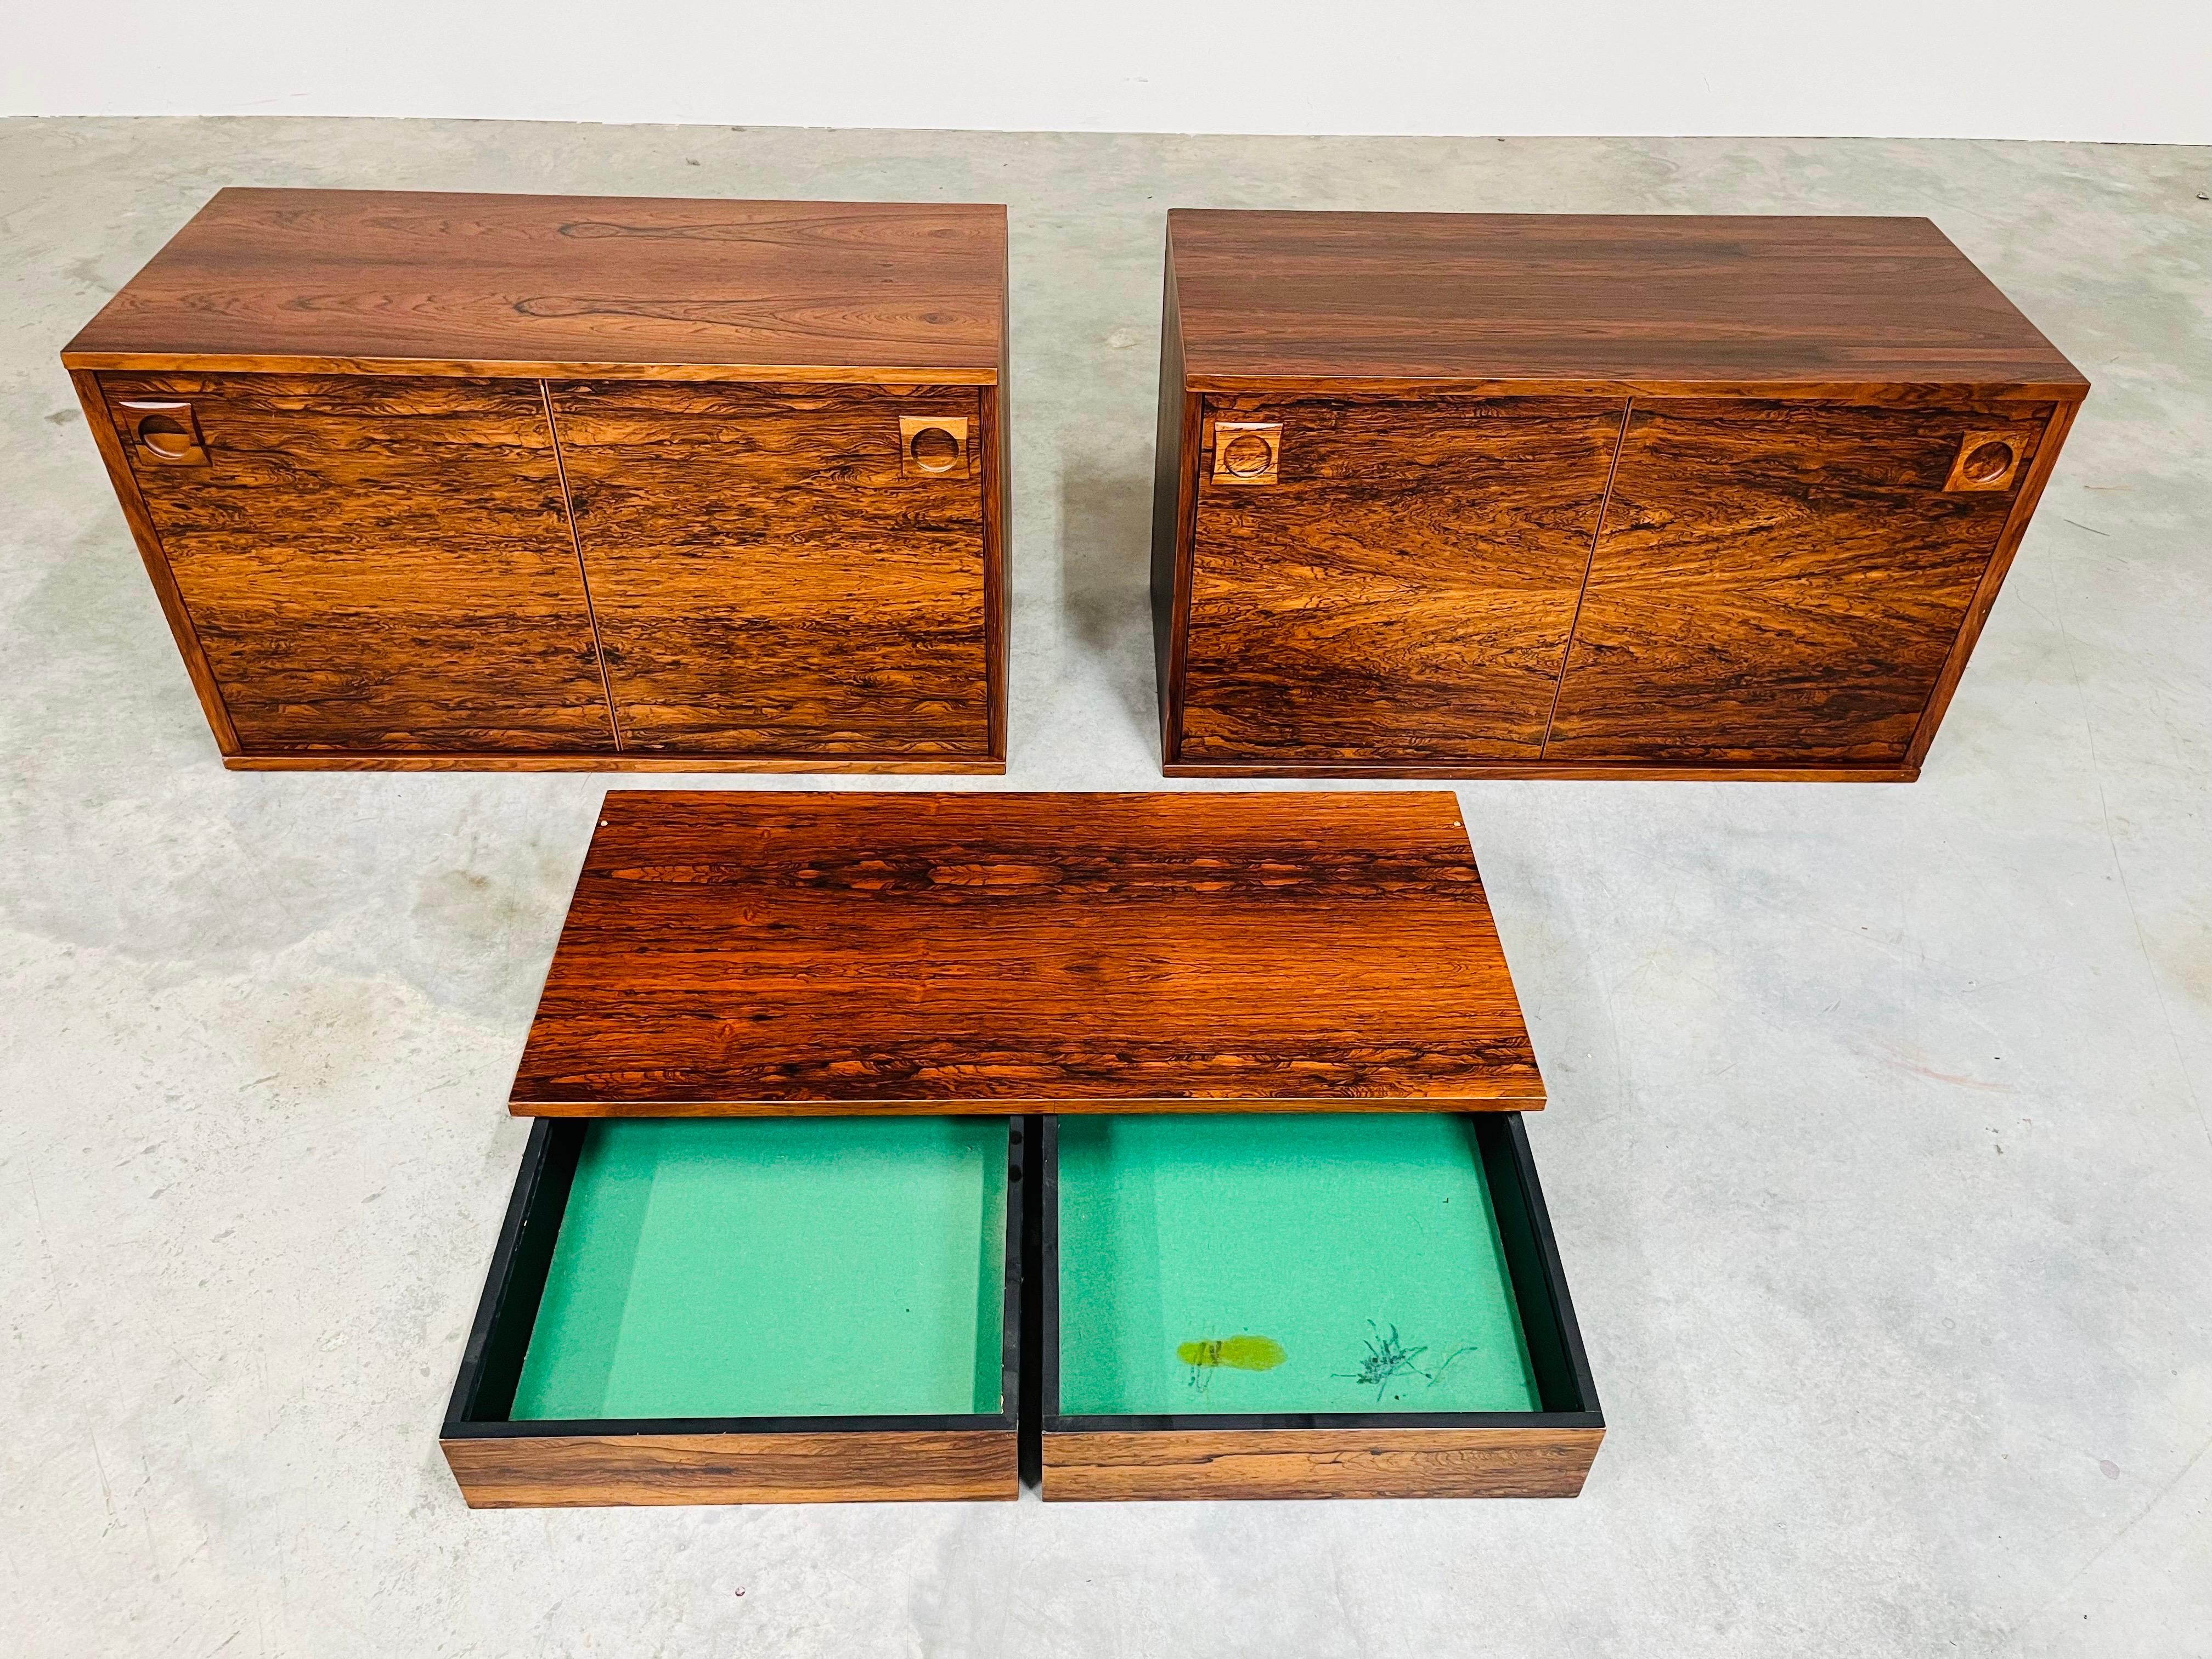 A beautiful 3 piece rosewood cabinet and hanging desk set to ad to your wall unit or create your own single row setup. Features 2 matching spring push-in sliding doors with removable rosewood shelves on both sides and a 2-drawer wall hanging desk.